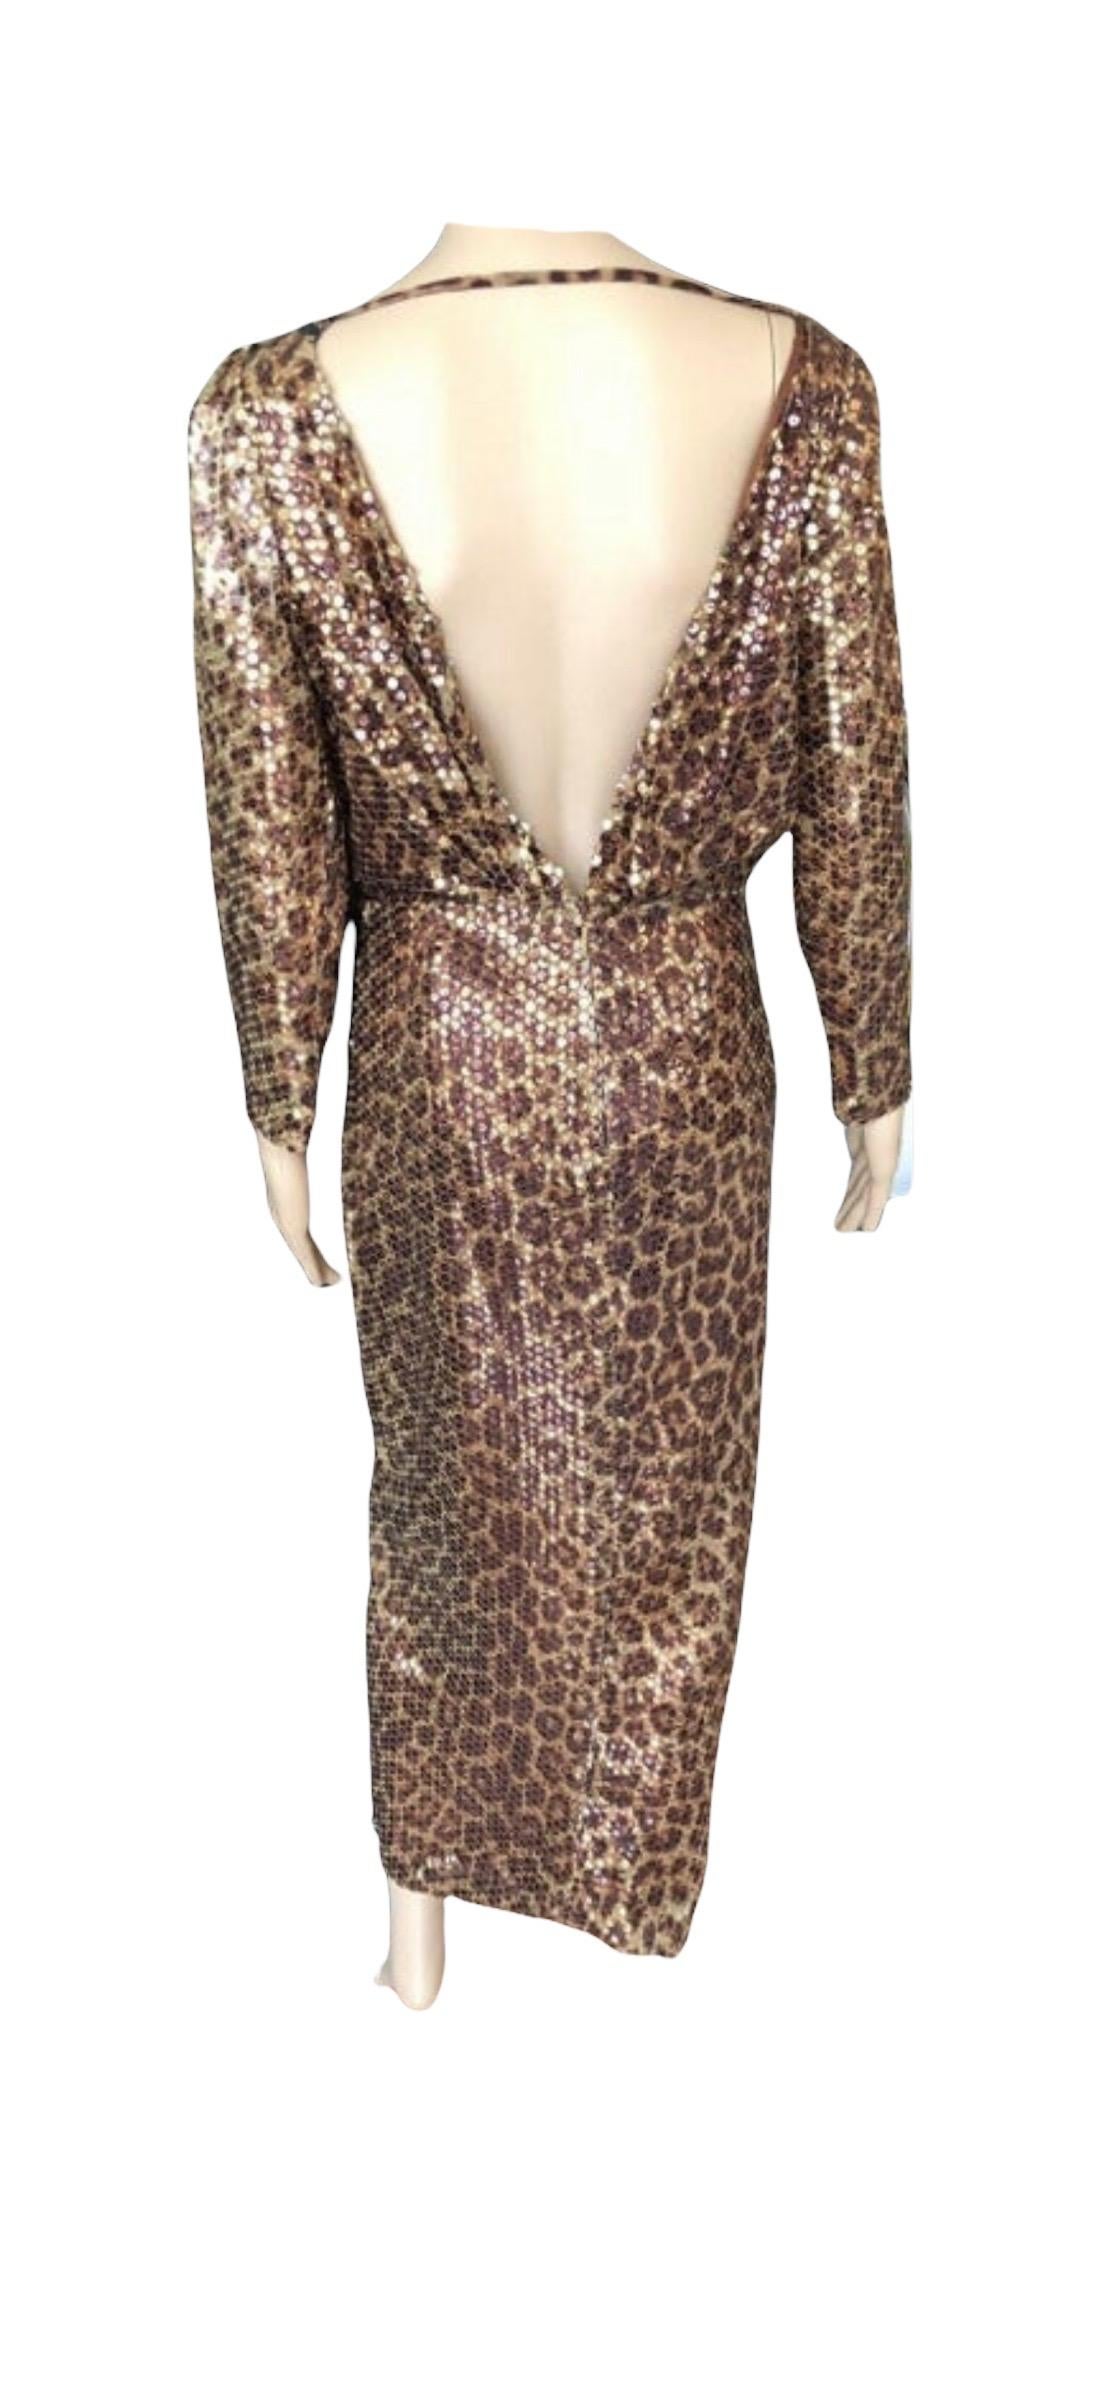 Roberto Cavalli F/W 2007 Runway Sequin Embellished Open Back Evening Dress Gown In Good Condition For Sale In Naples, FL